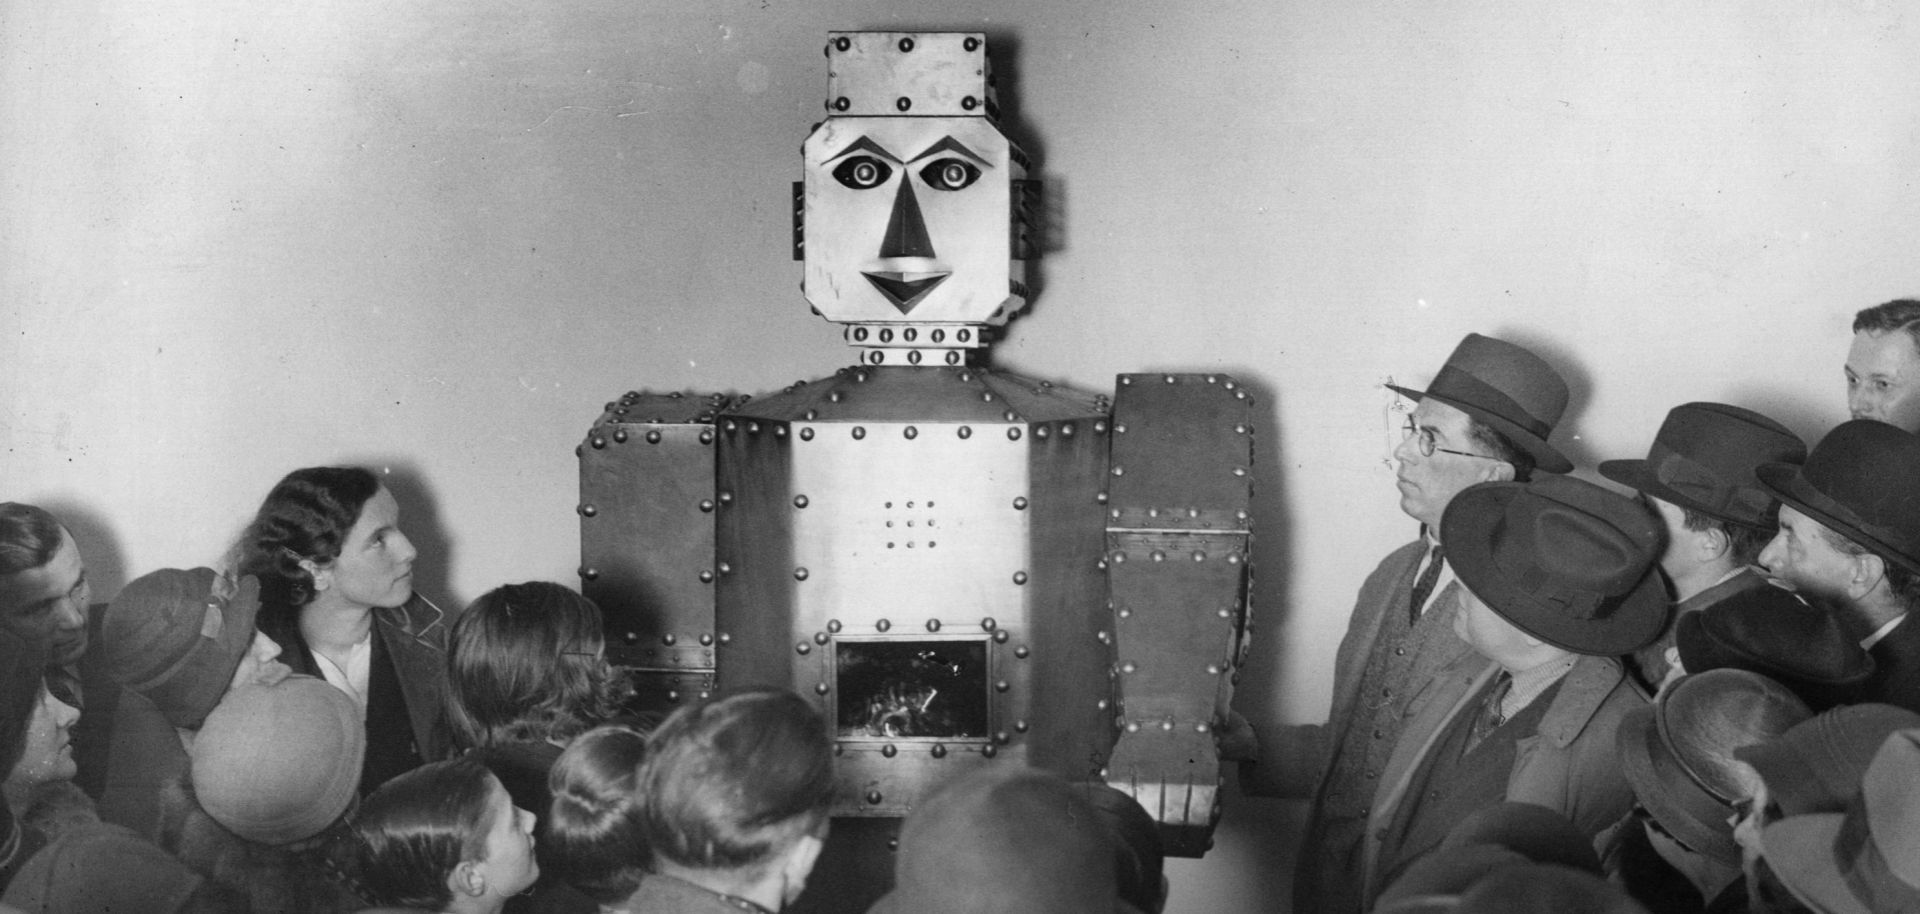 There's more than one way to predict the future, something not lost on shoppers as they admire a fortune-telling robot at Selfridges Store in London, 1934.